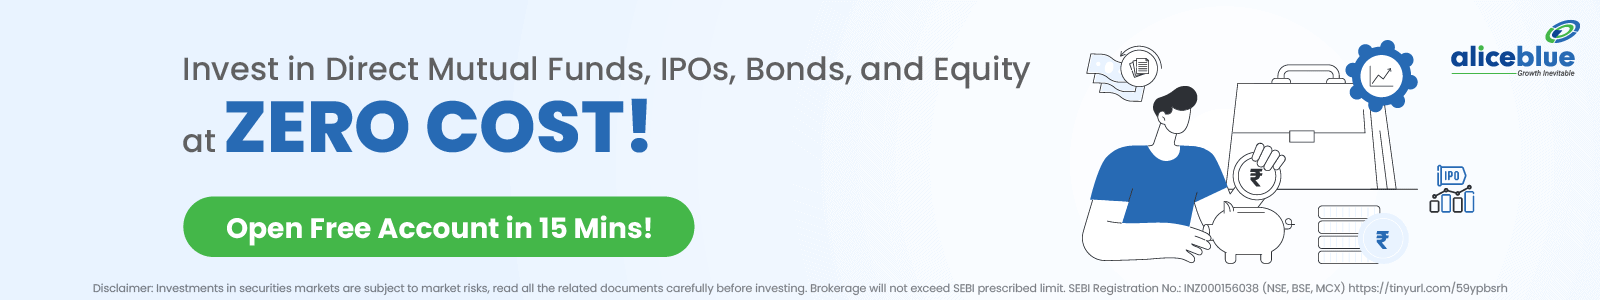 Invest in Direct Mutual Funds, IPOs, Bonds, and Equity at ZERO COST!